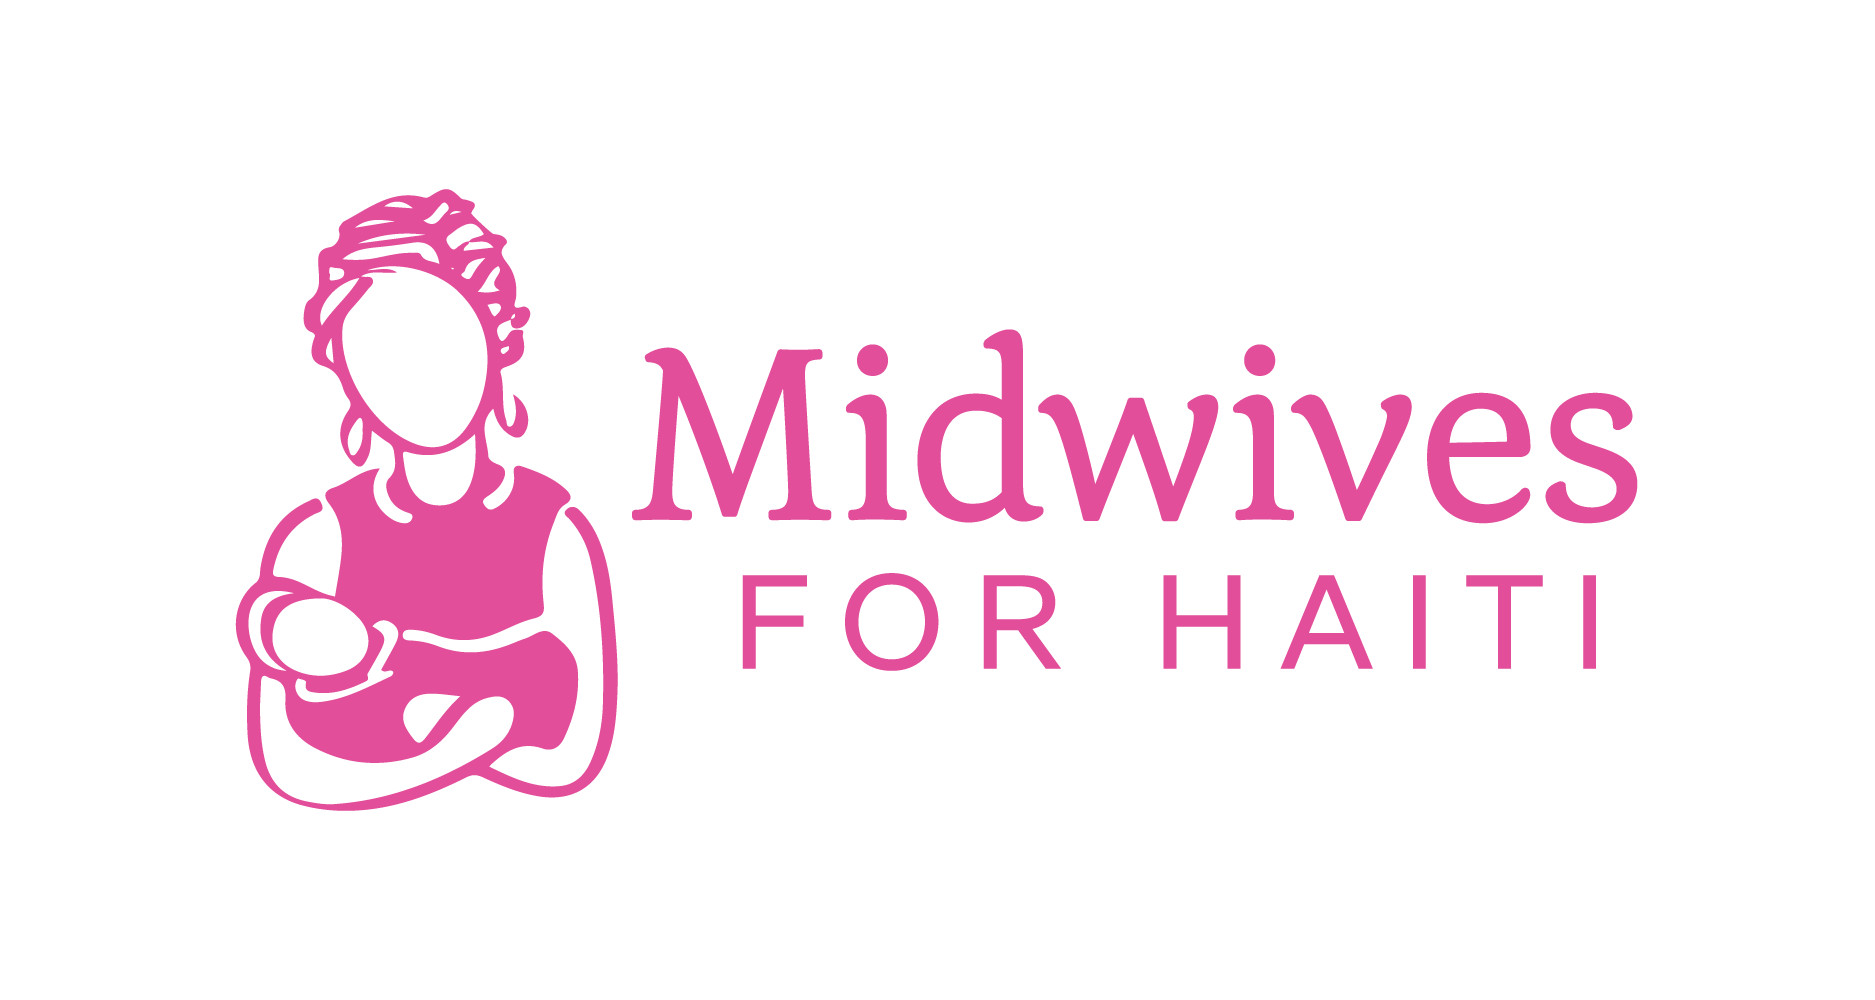 Midwives For Haiti